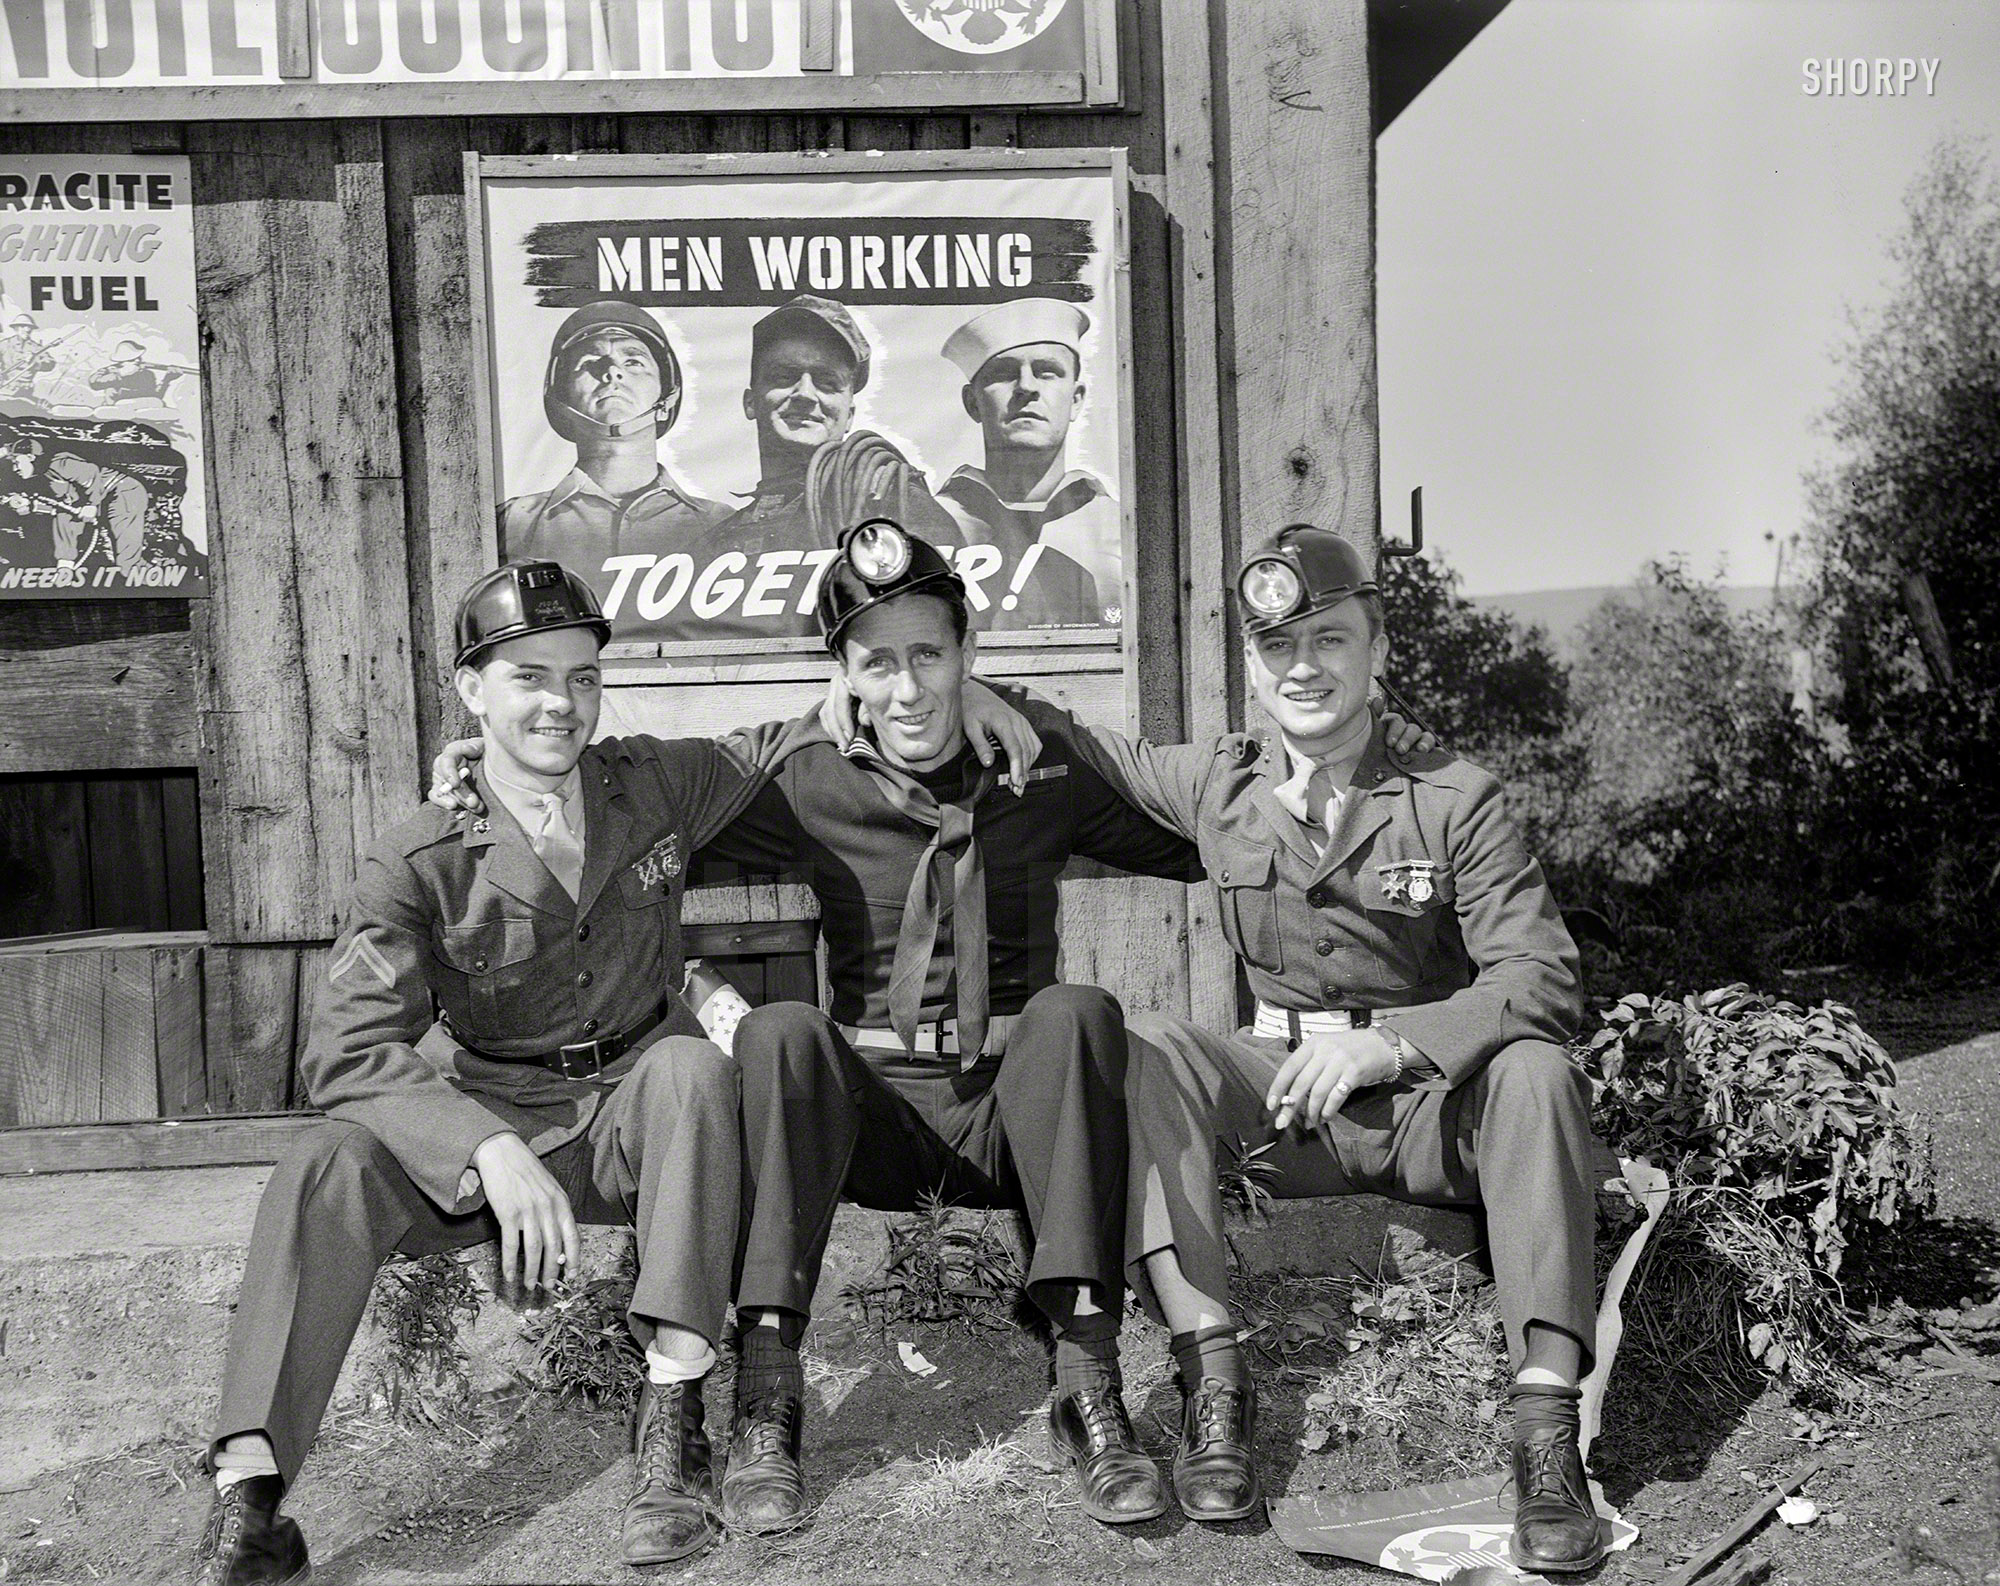 October 1942. "War production drive. Anthracite rallies. Servicemen working together! Soldiers, sailors and marines went into Pennsylvania mines during the anthracite rallies, September 30th through October 1st, and saw how hard coal is extracted from beneath the earth's surface." 4x5 nitrate negative by William Perlitch for the Office of War Information. View full size.